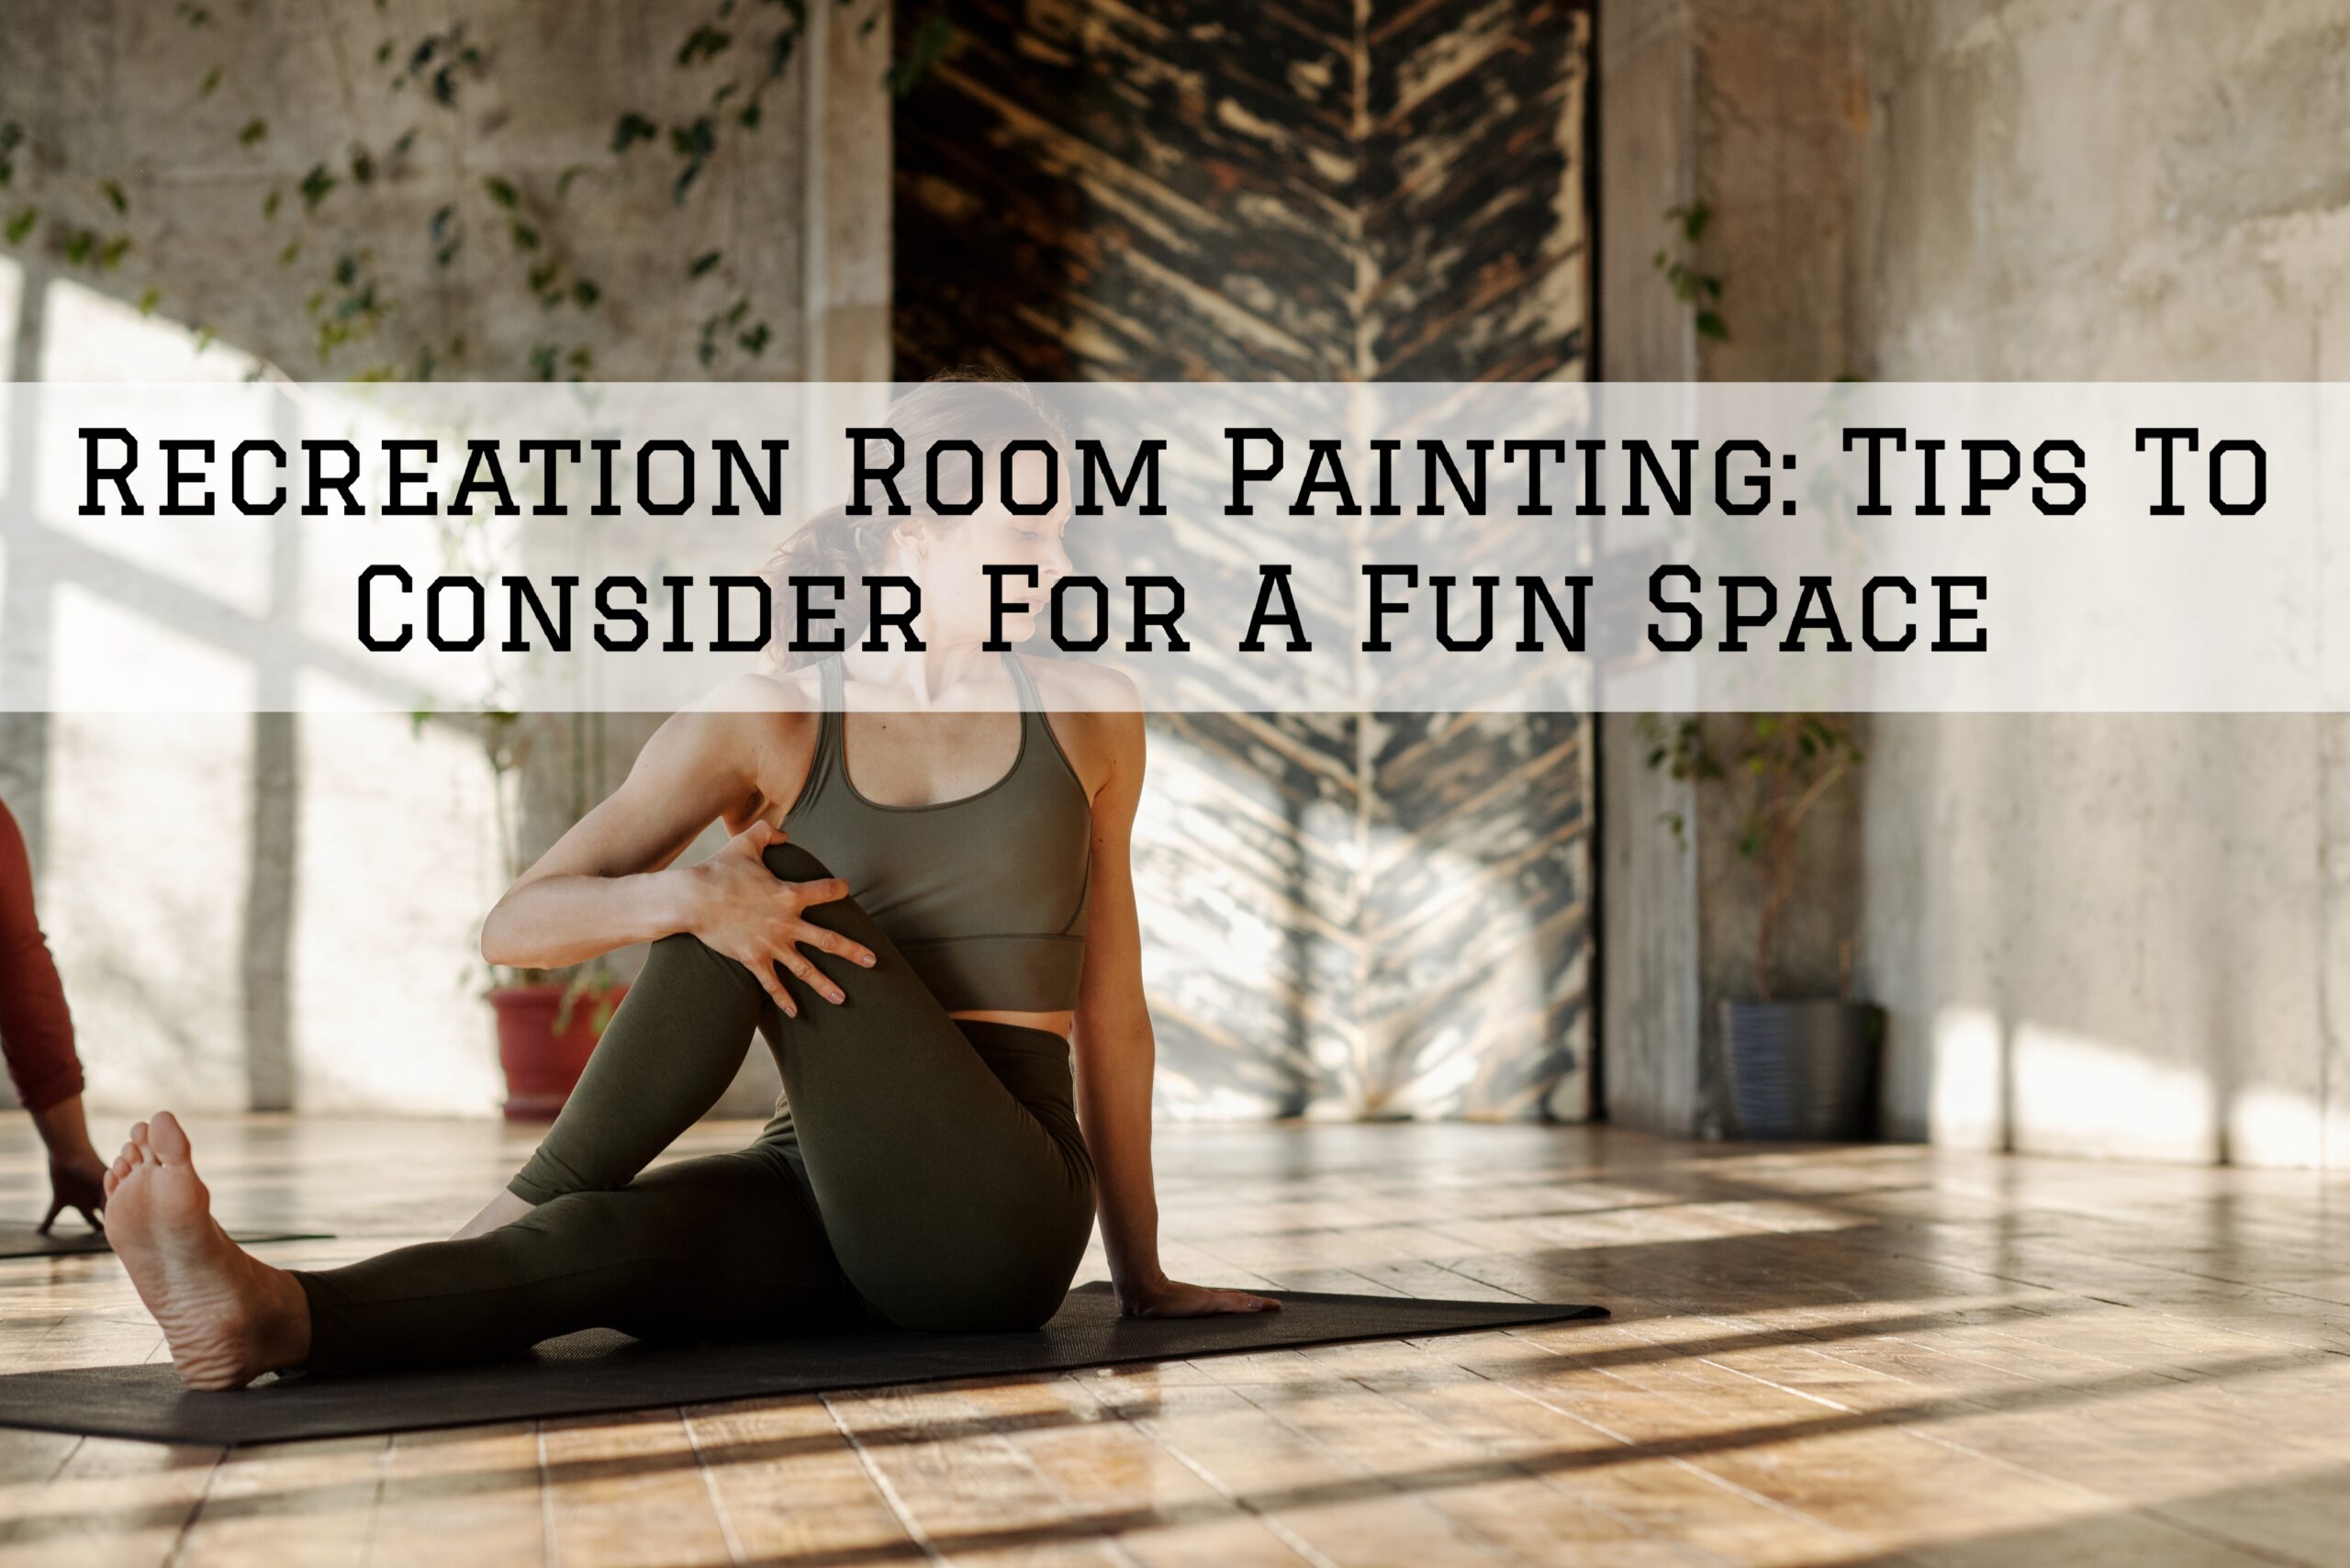 2023-05-21 Left Moon Painting Unionville PA Recreation Room Painting Tips